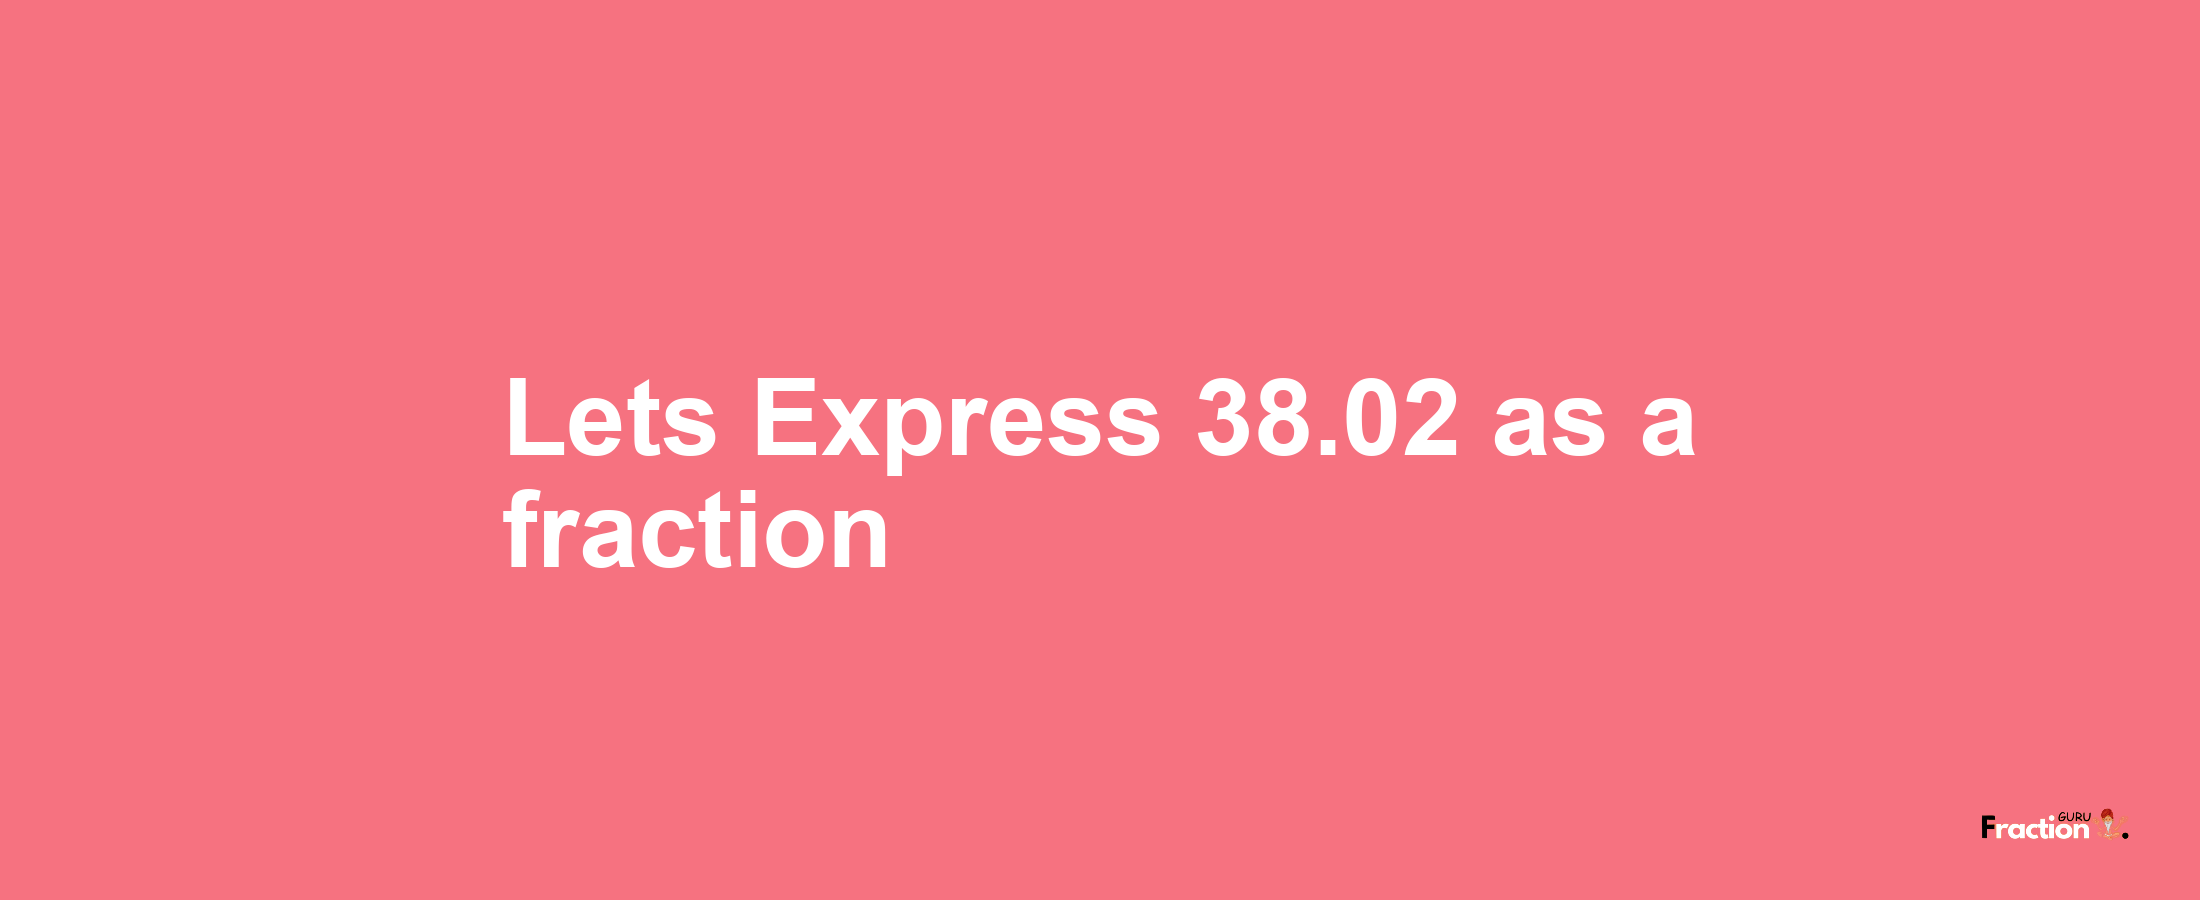 Lets Express 38.02 as afraction